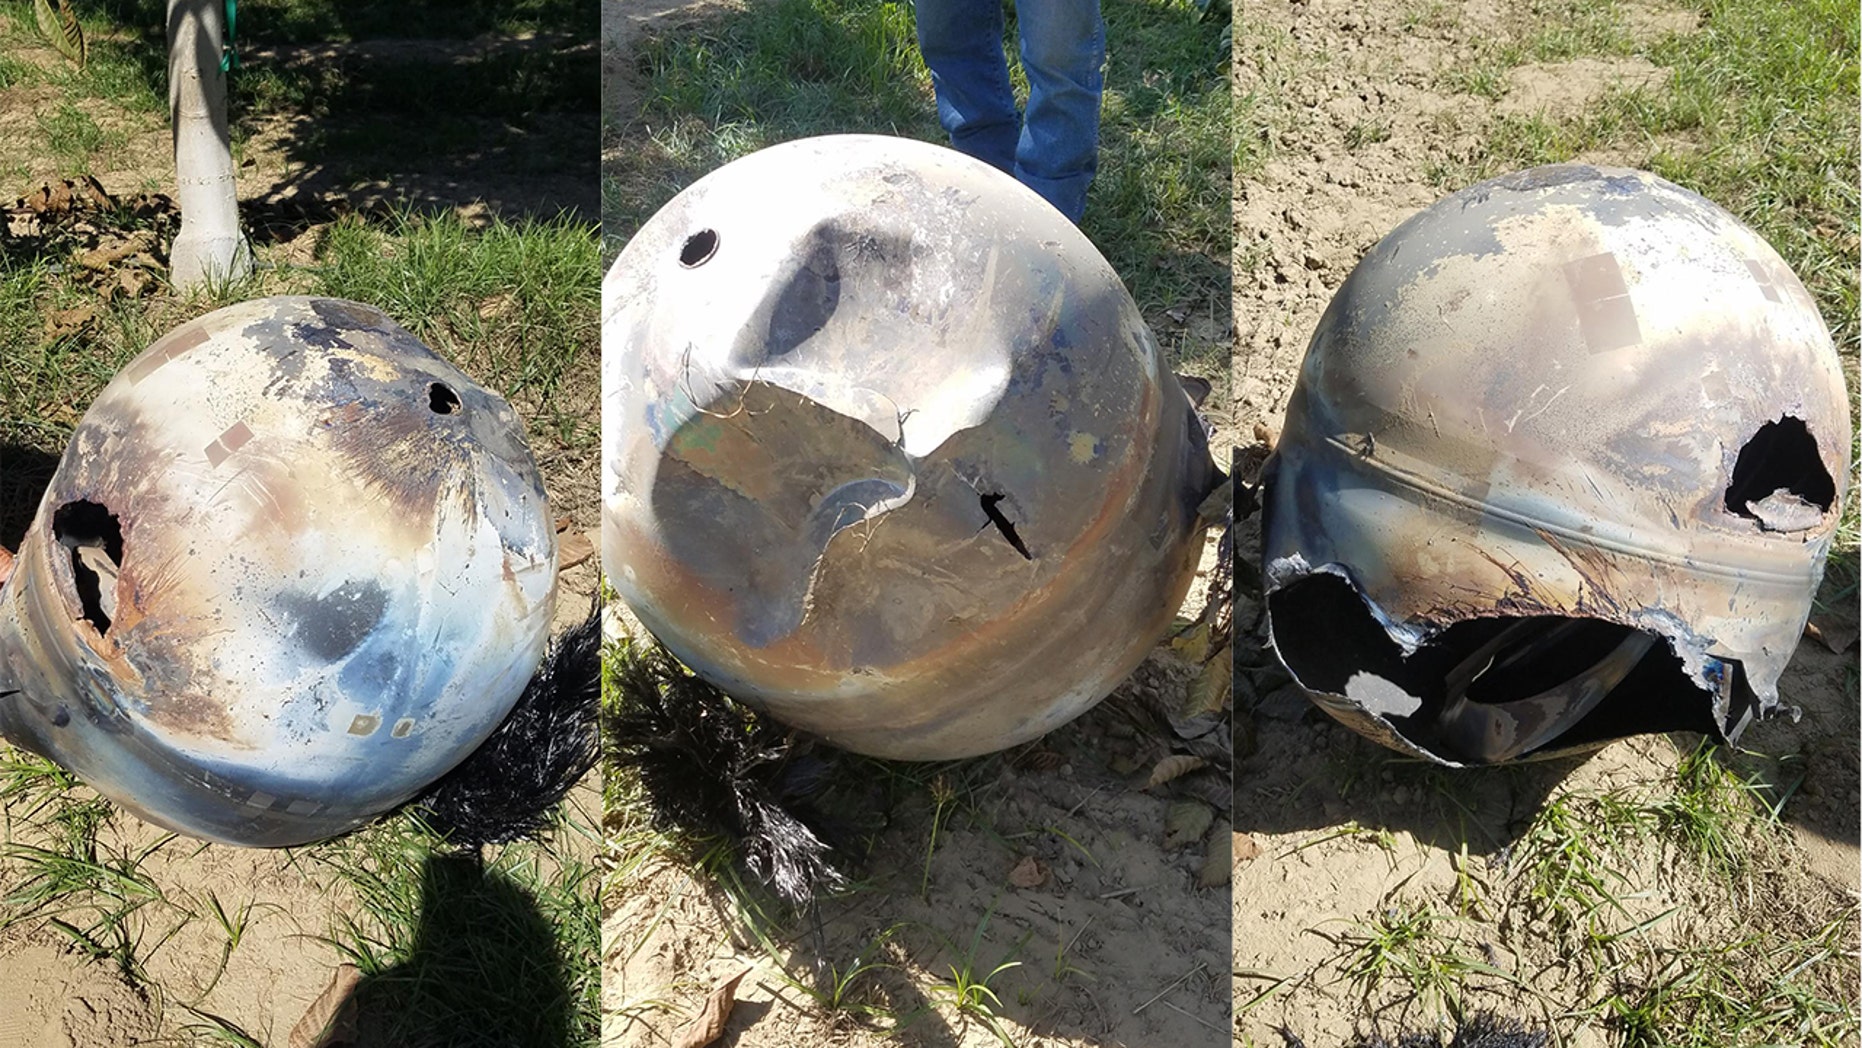 Mysterious space object that landed on California ranch identified